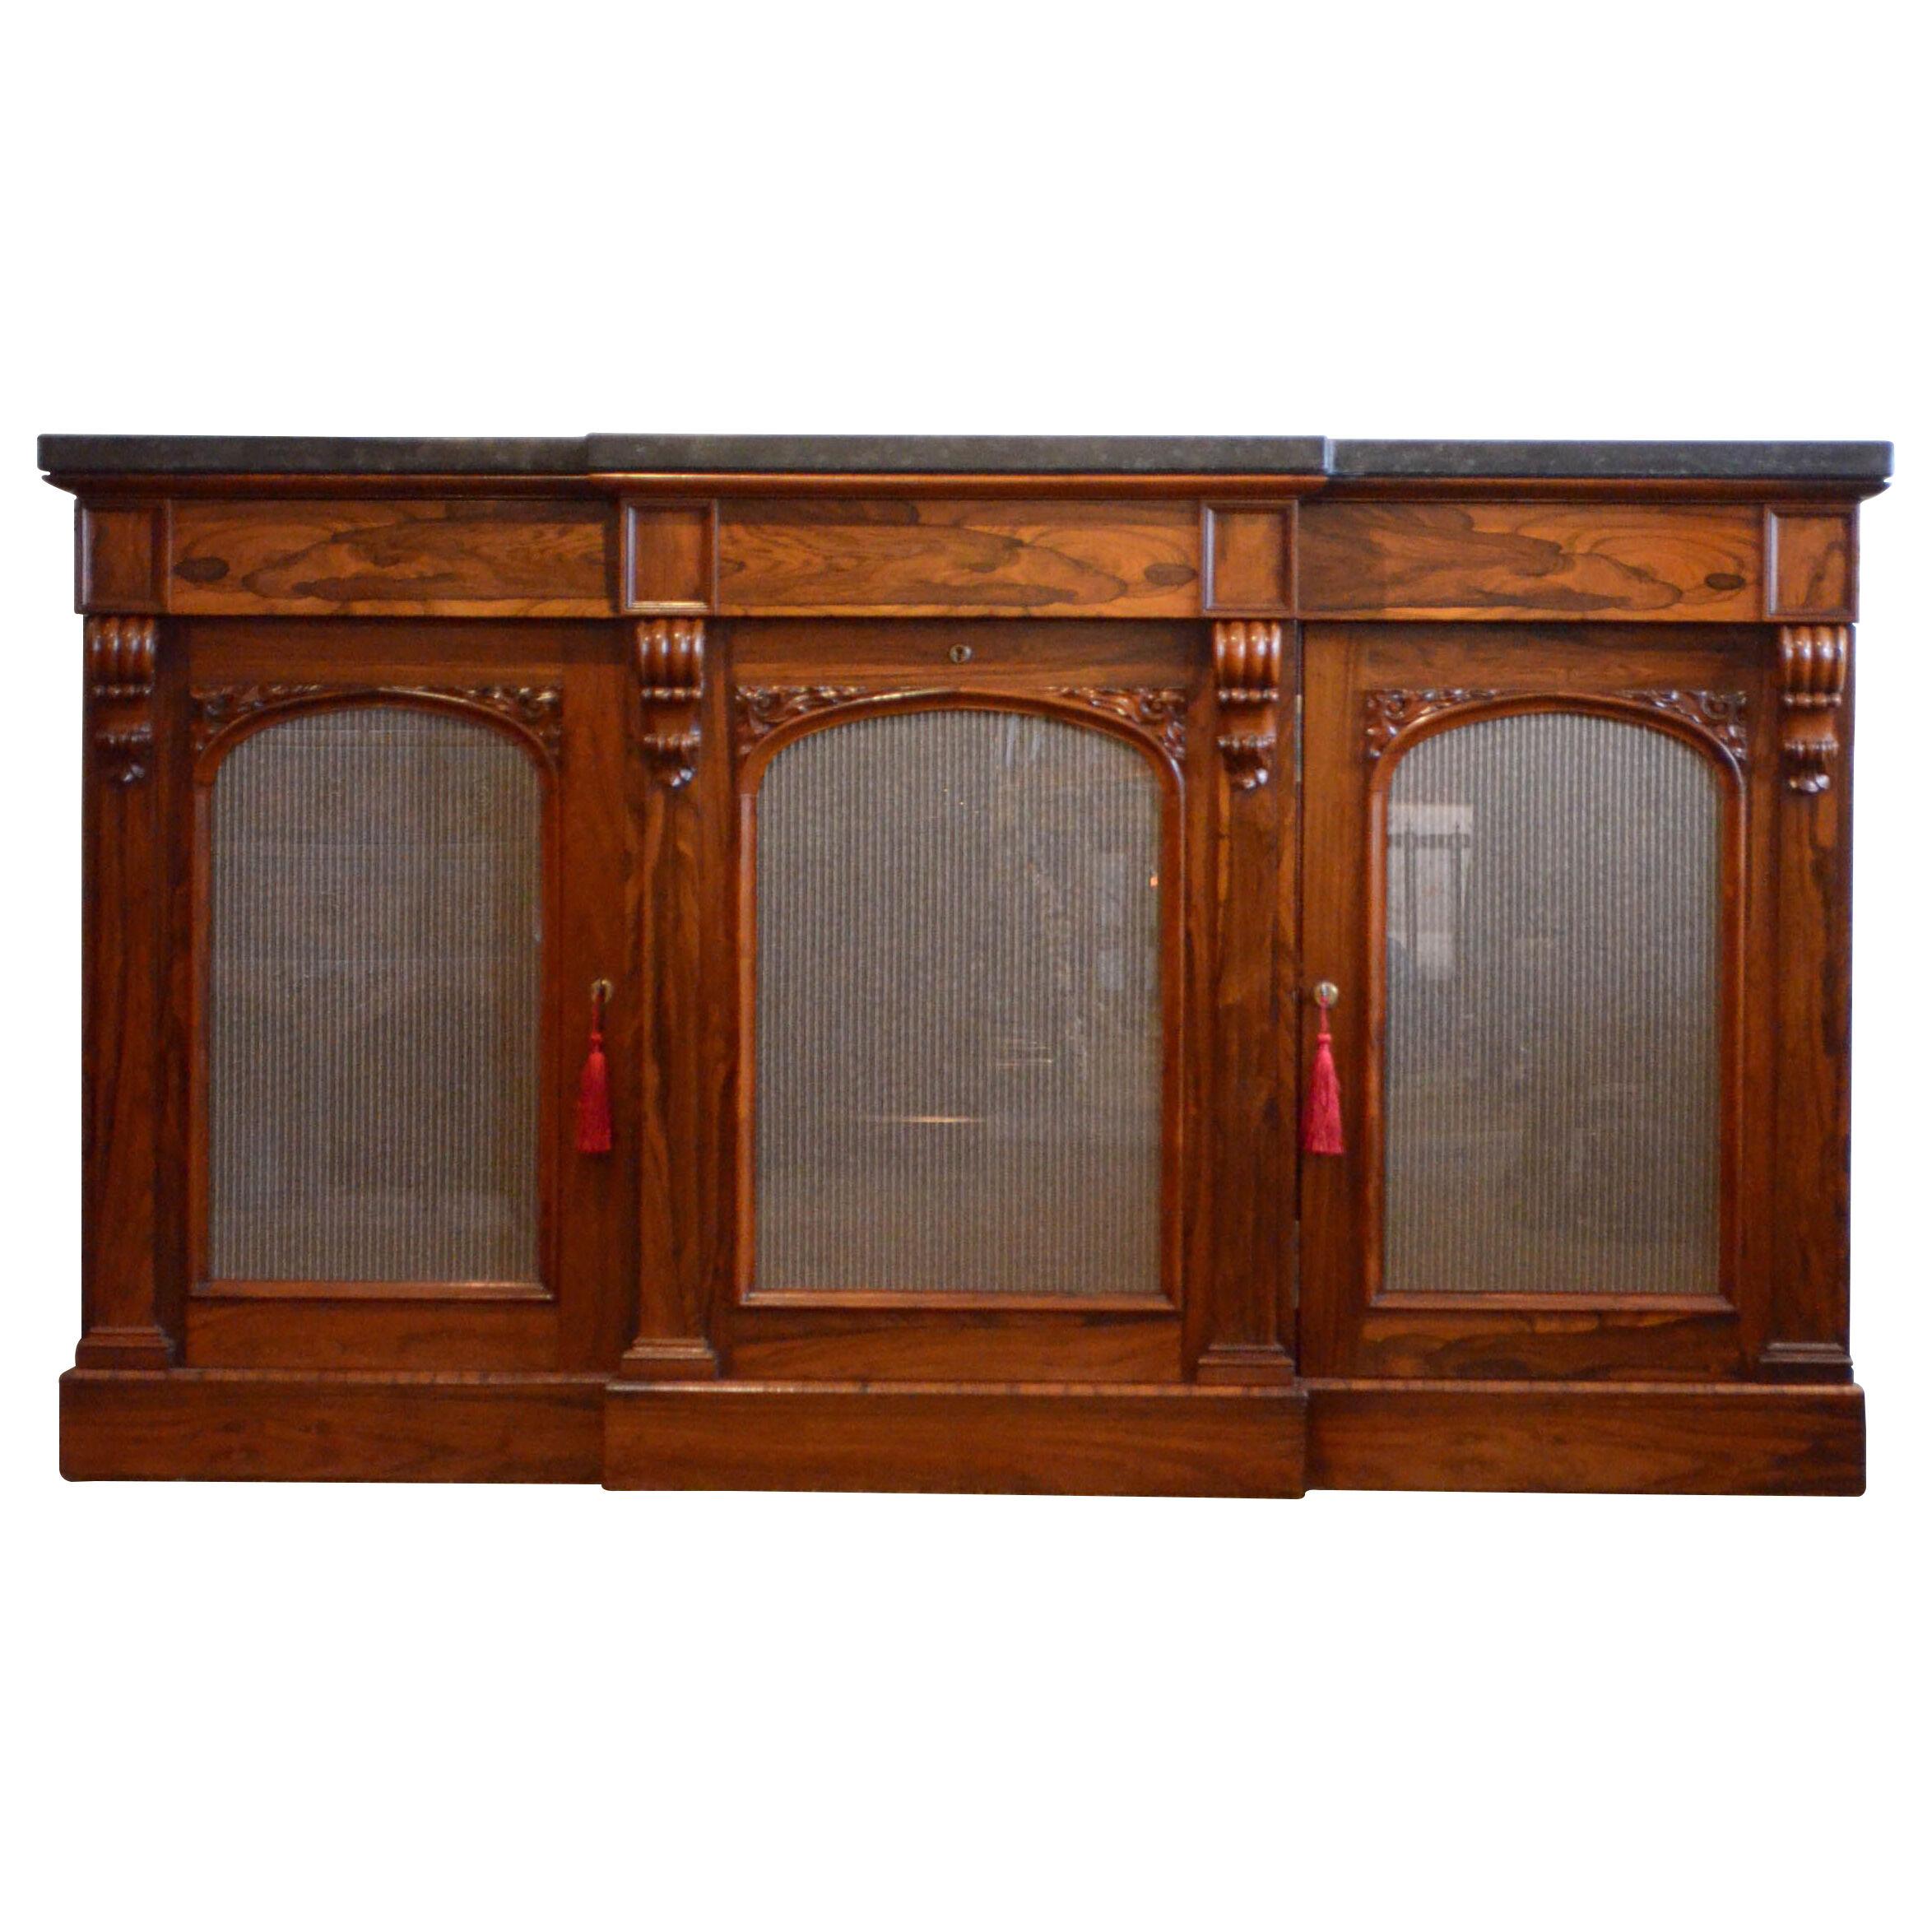 Finest quality William IV Rosewood Sideboard 